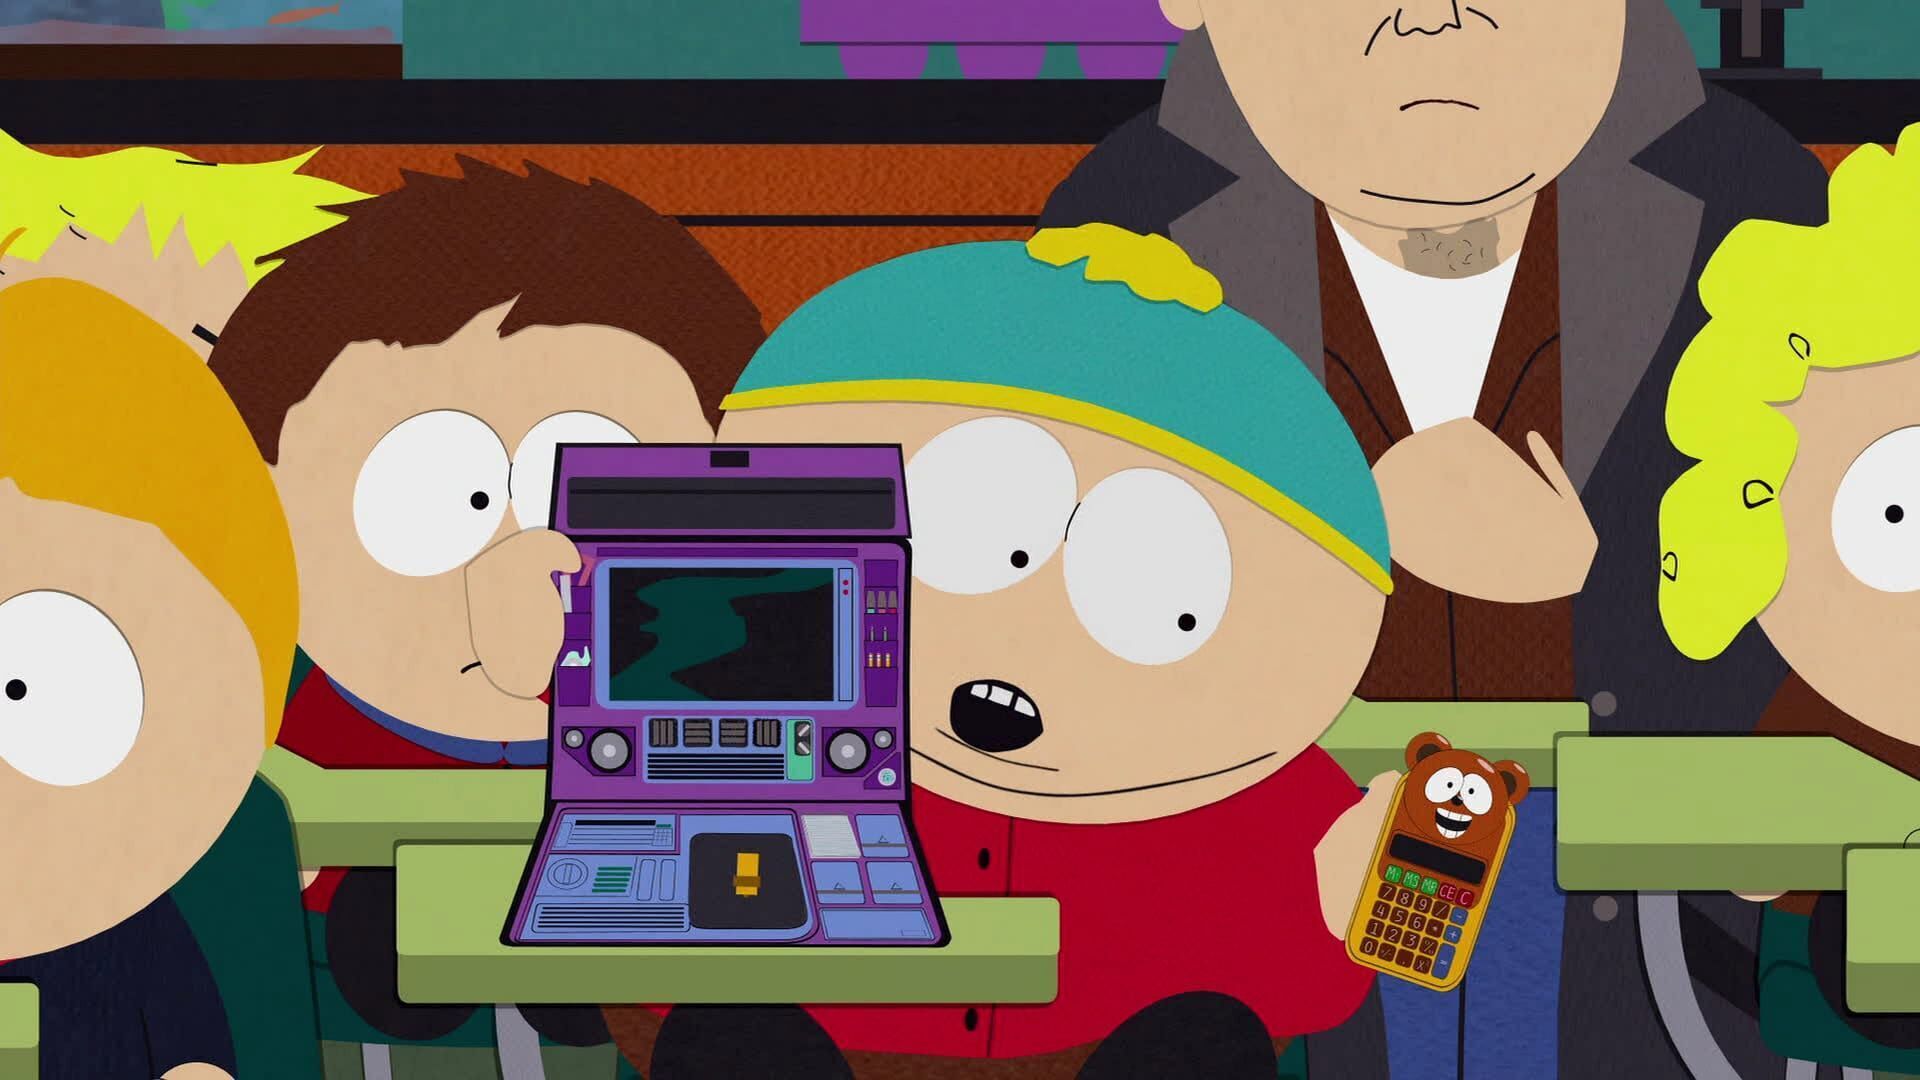 South Park - Trapper Keeper